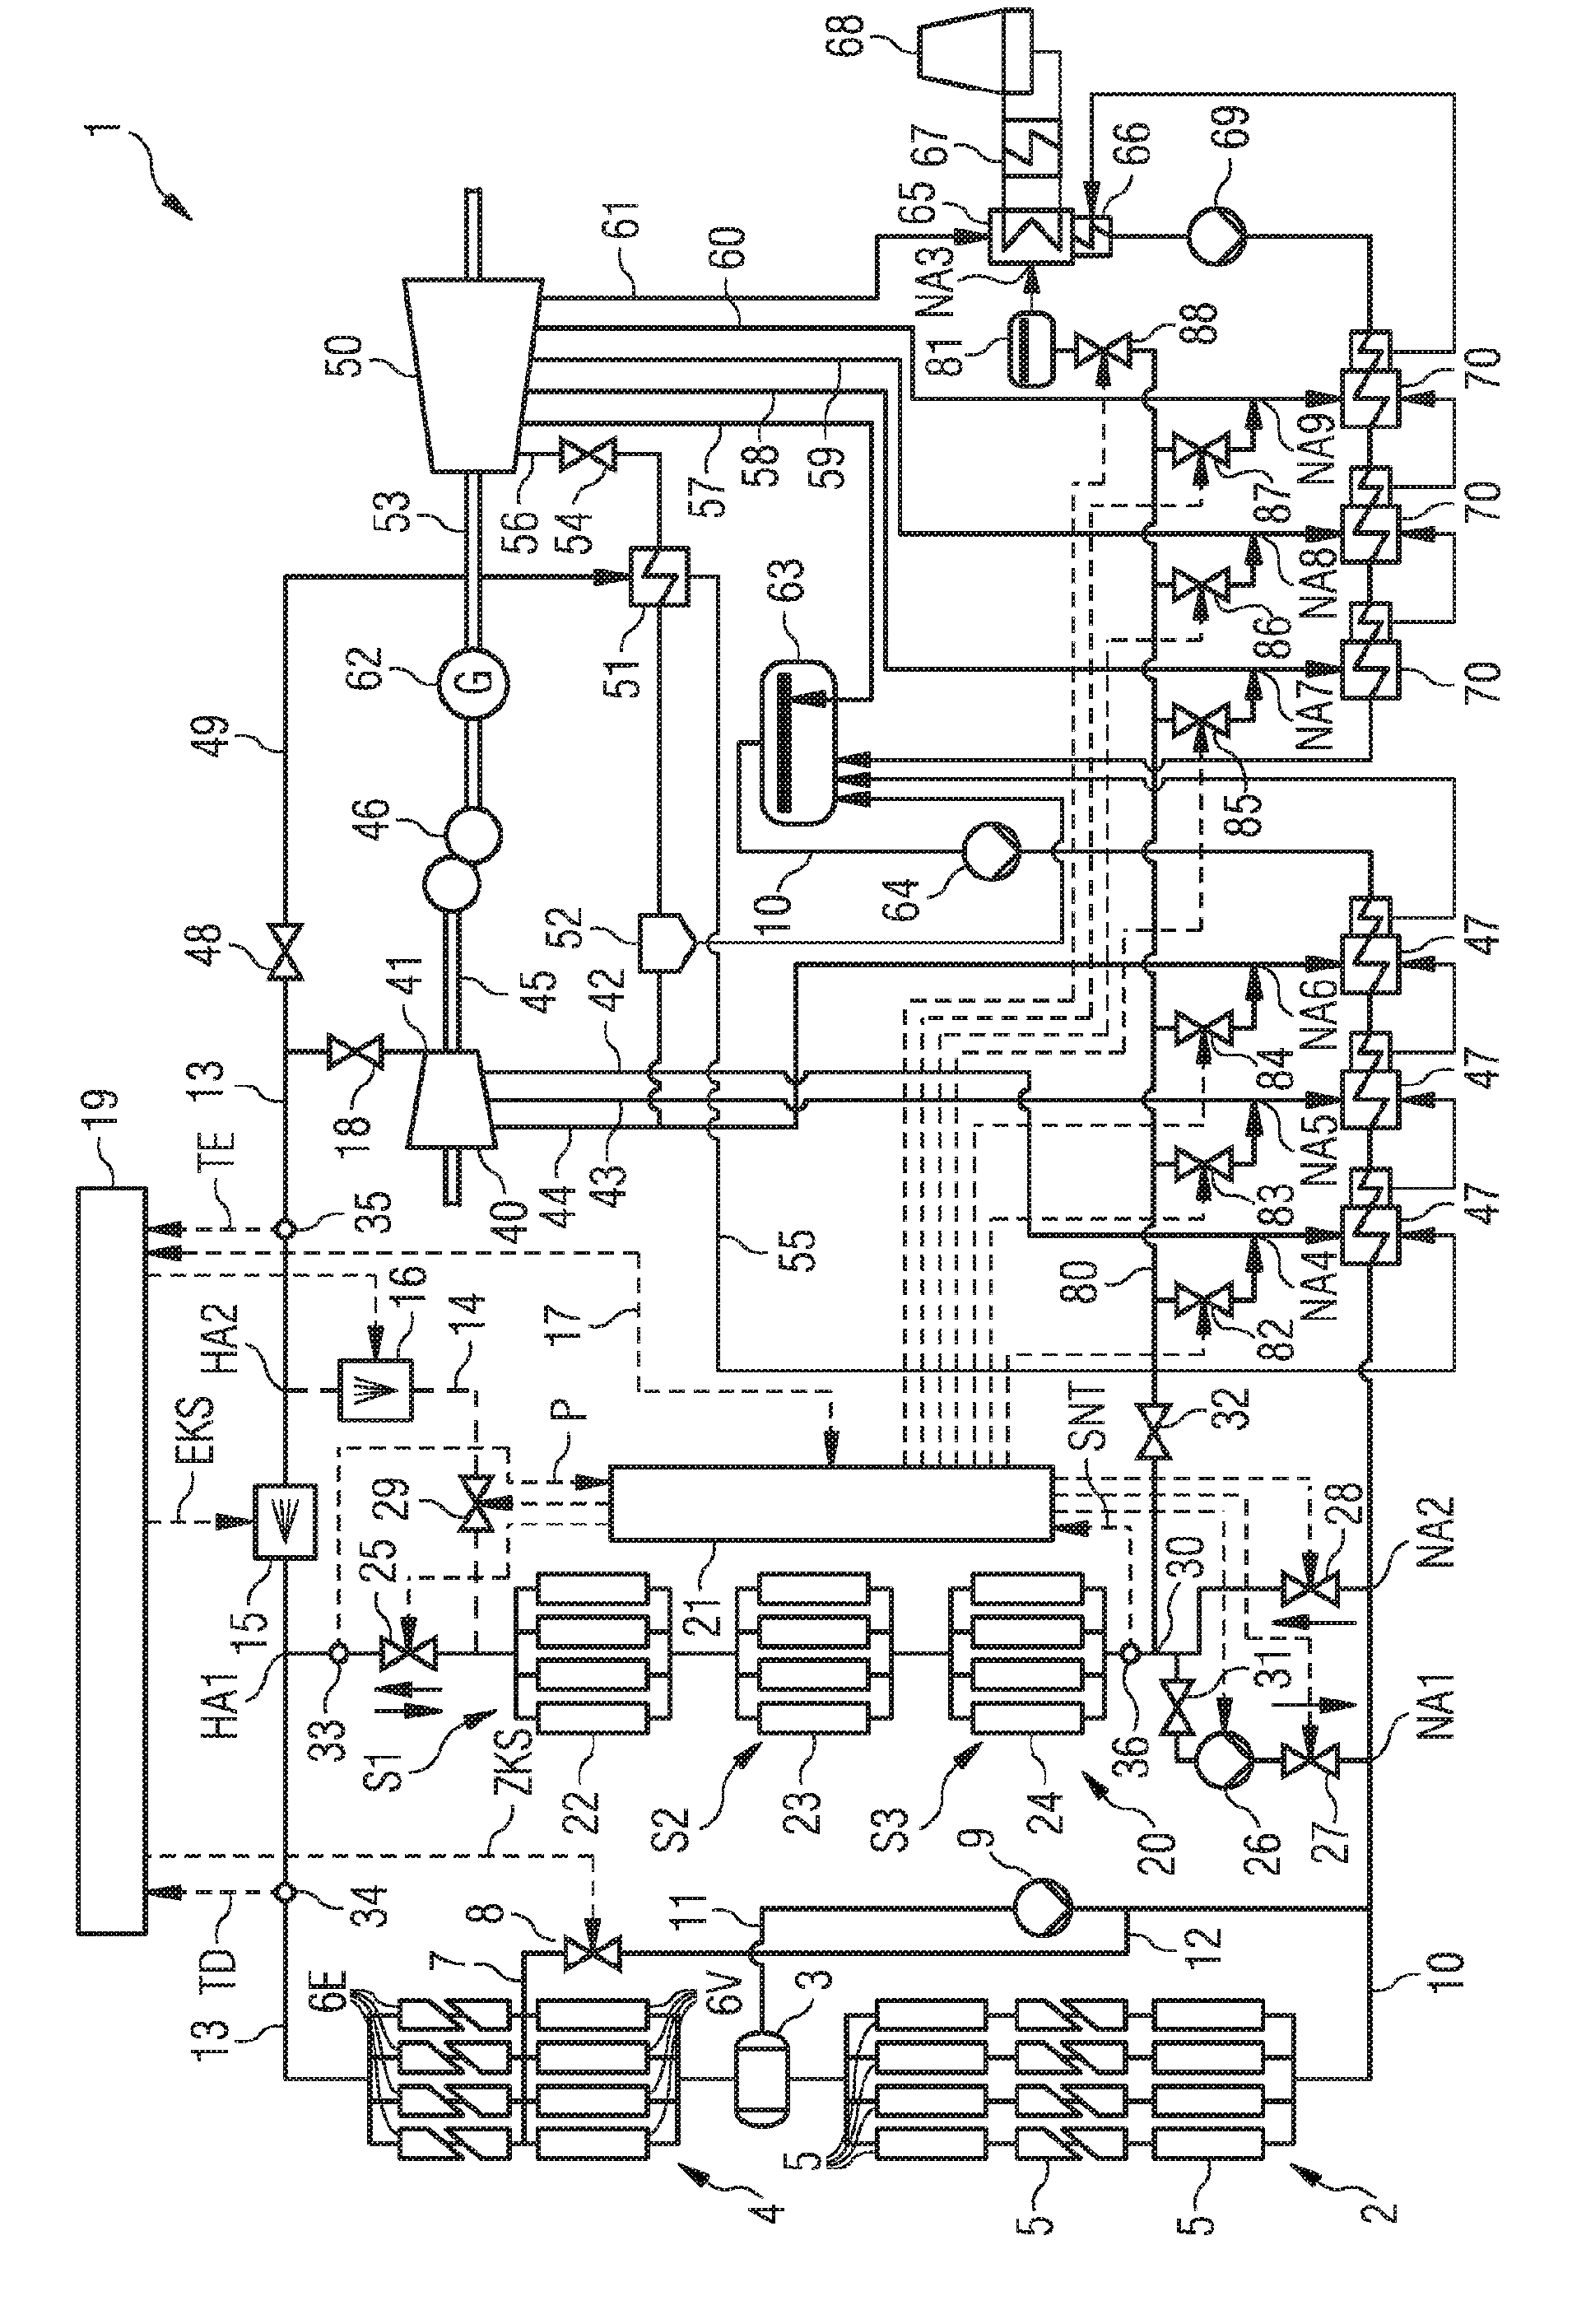 Solar thermal power plant and method for operating a solar thermal power plant